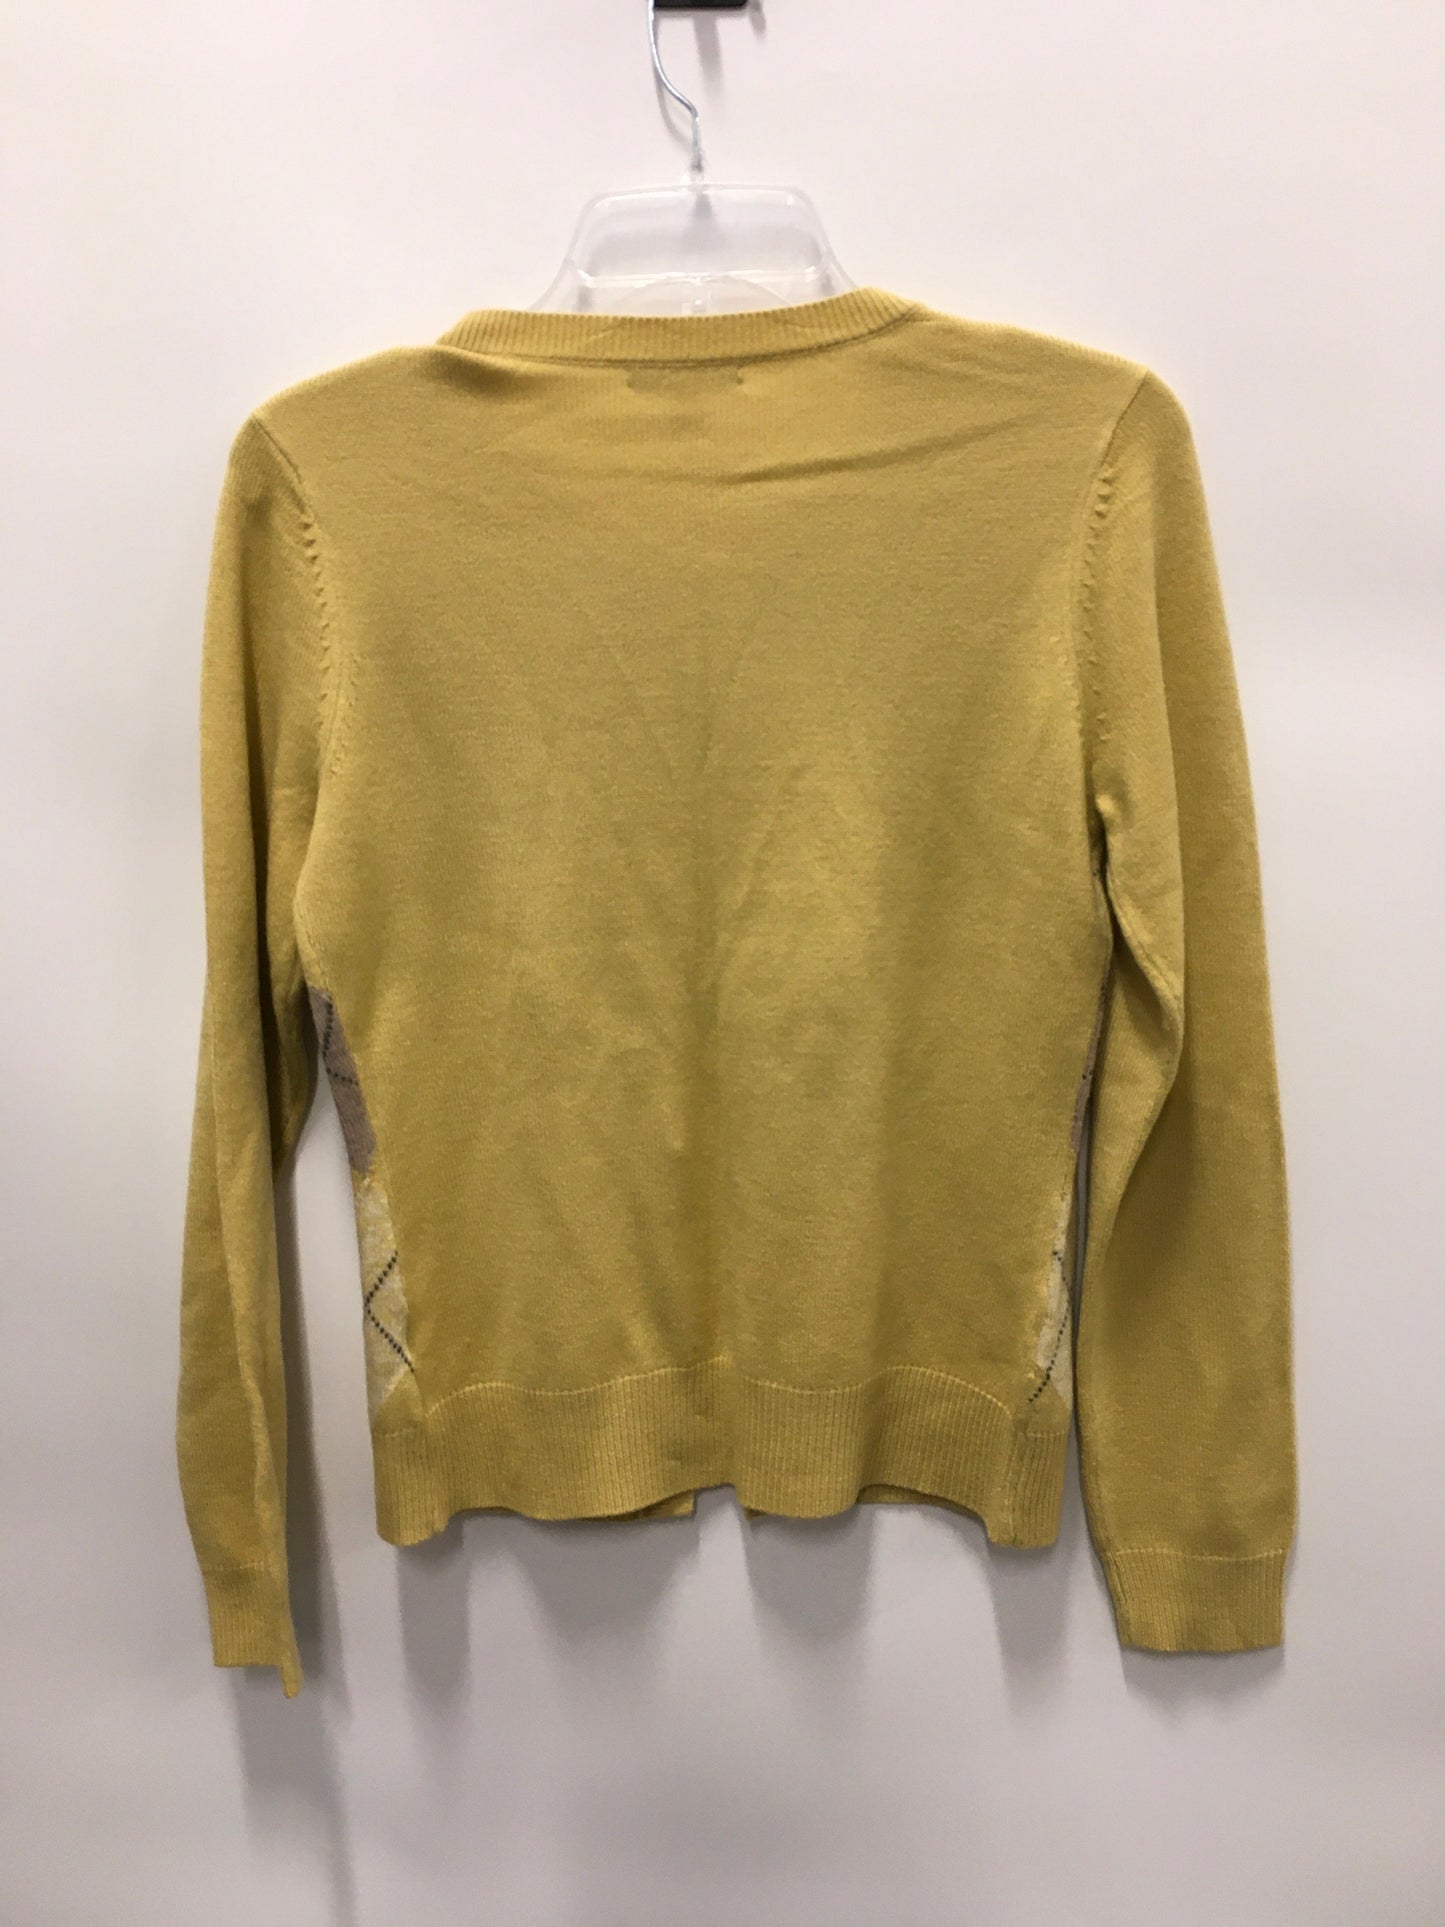 Yellow Cardigan New York And Co, Size S